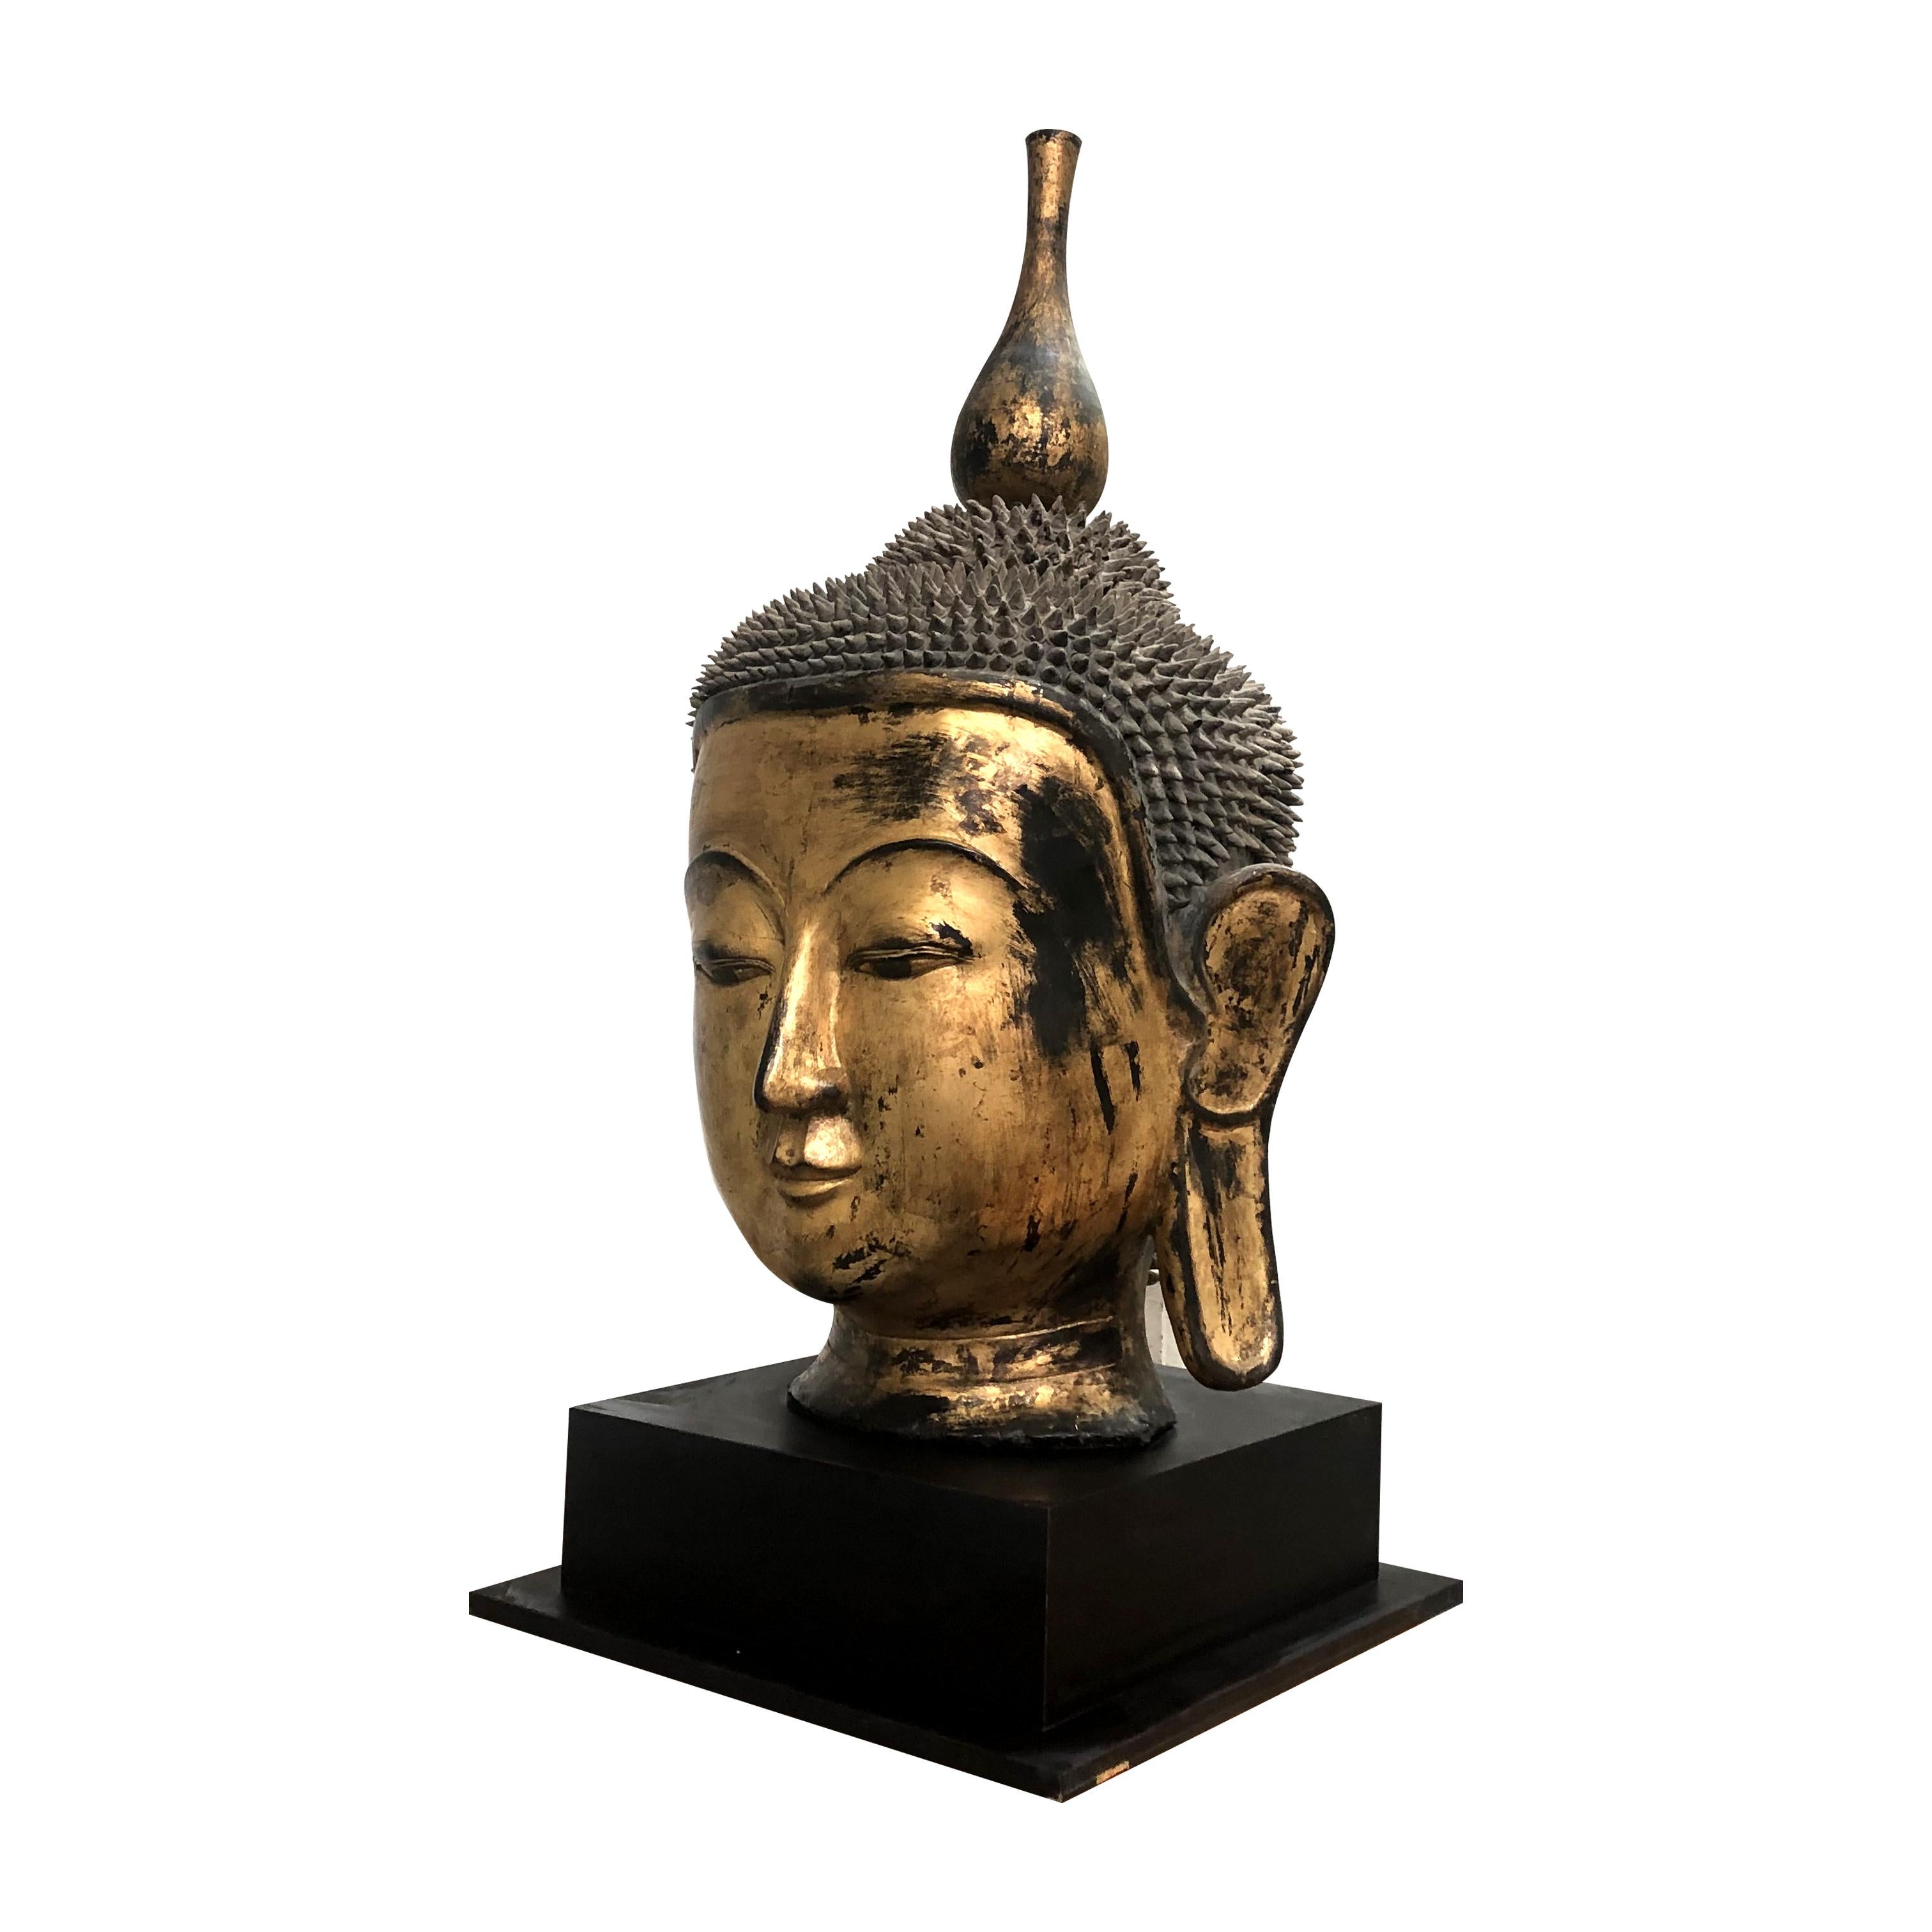 Other Early 20th Century Shan Burmese Large Dry Lacquer Gilt Buddha Head Sculpture